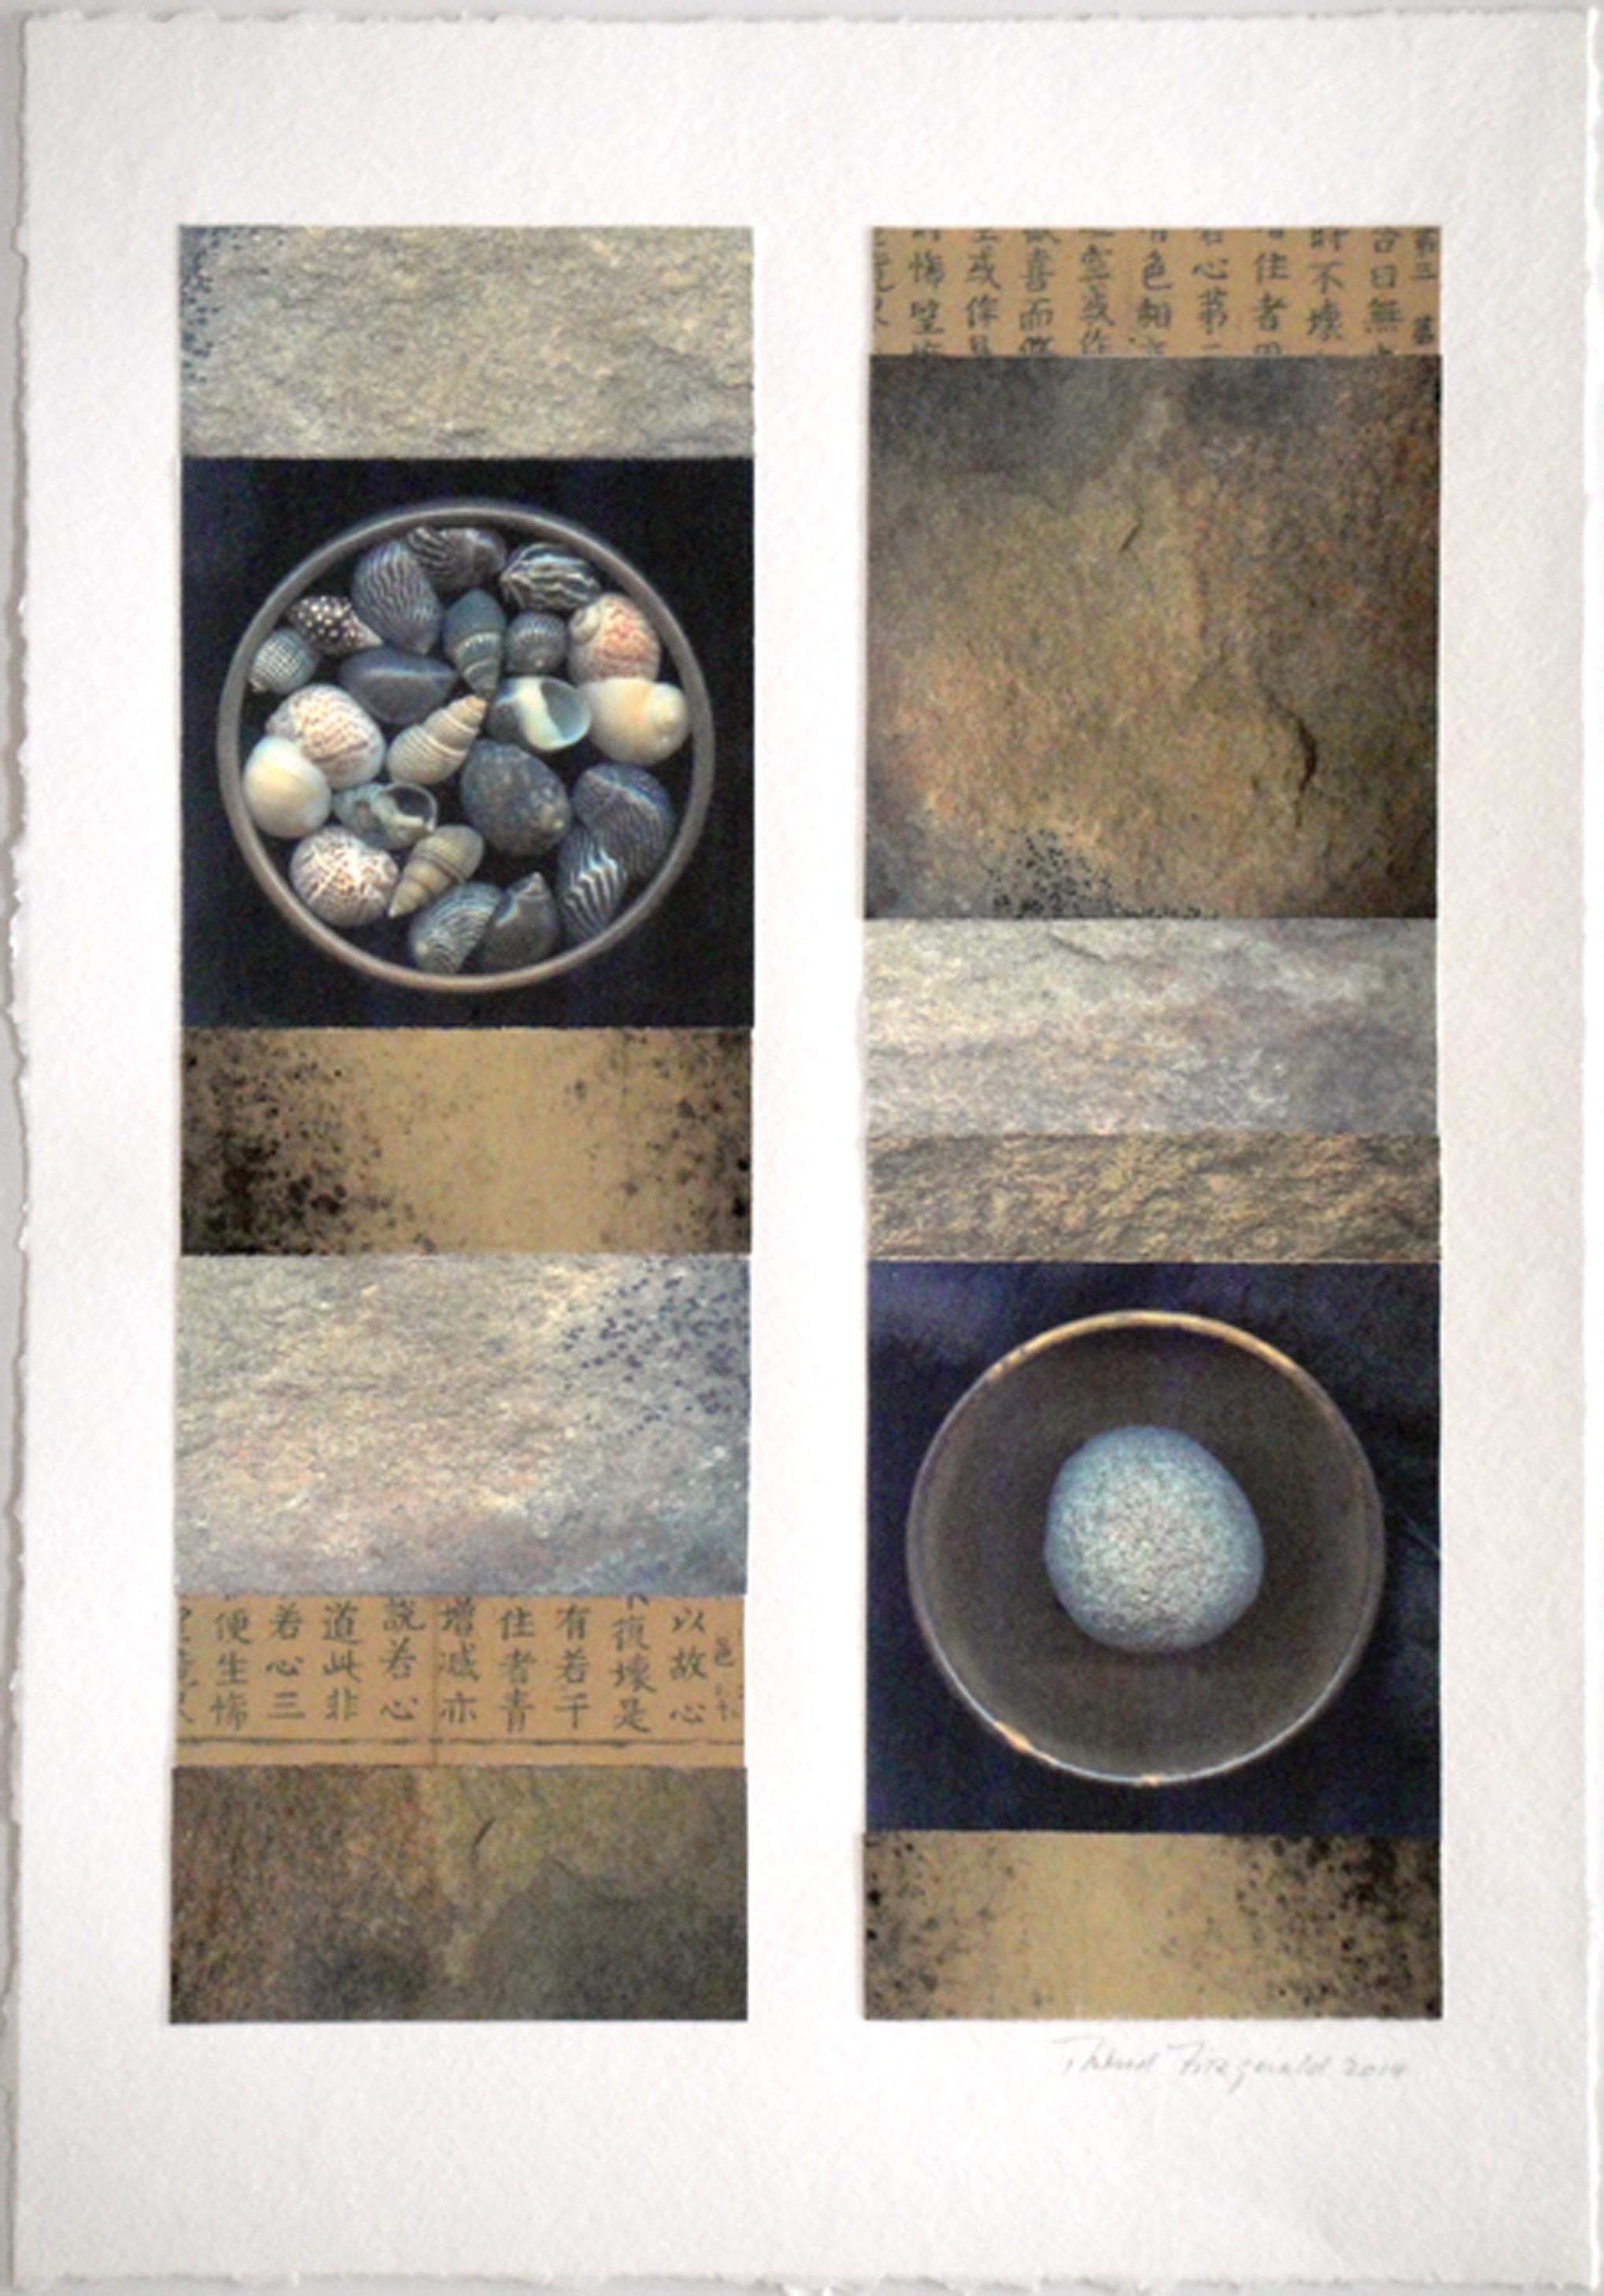 Astrid Fitzgerald Figurative Print - Collage 472, photographic collage of rocks, beige and neutral